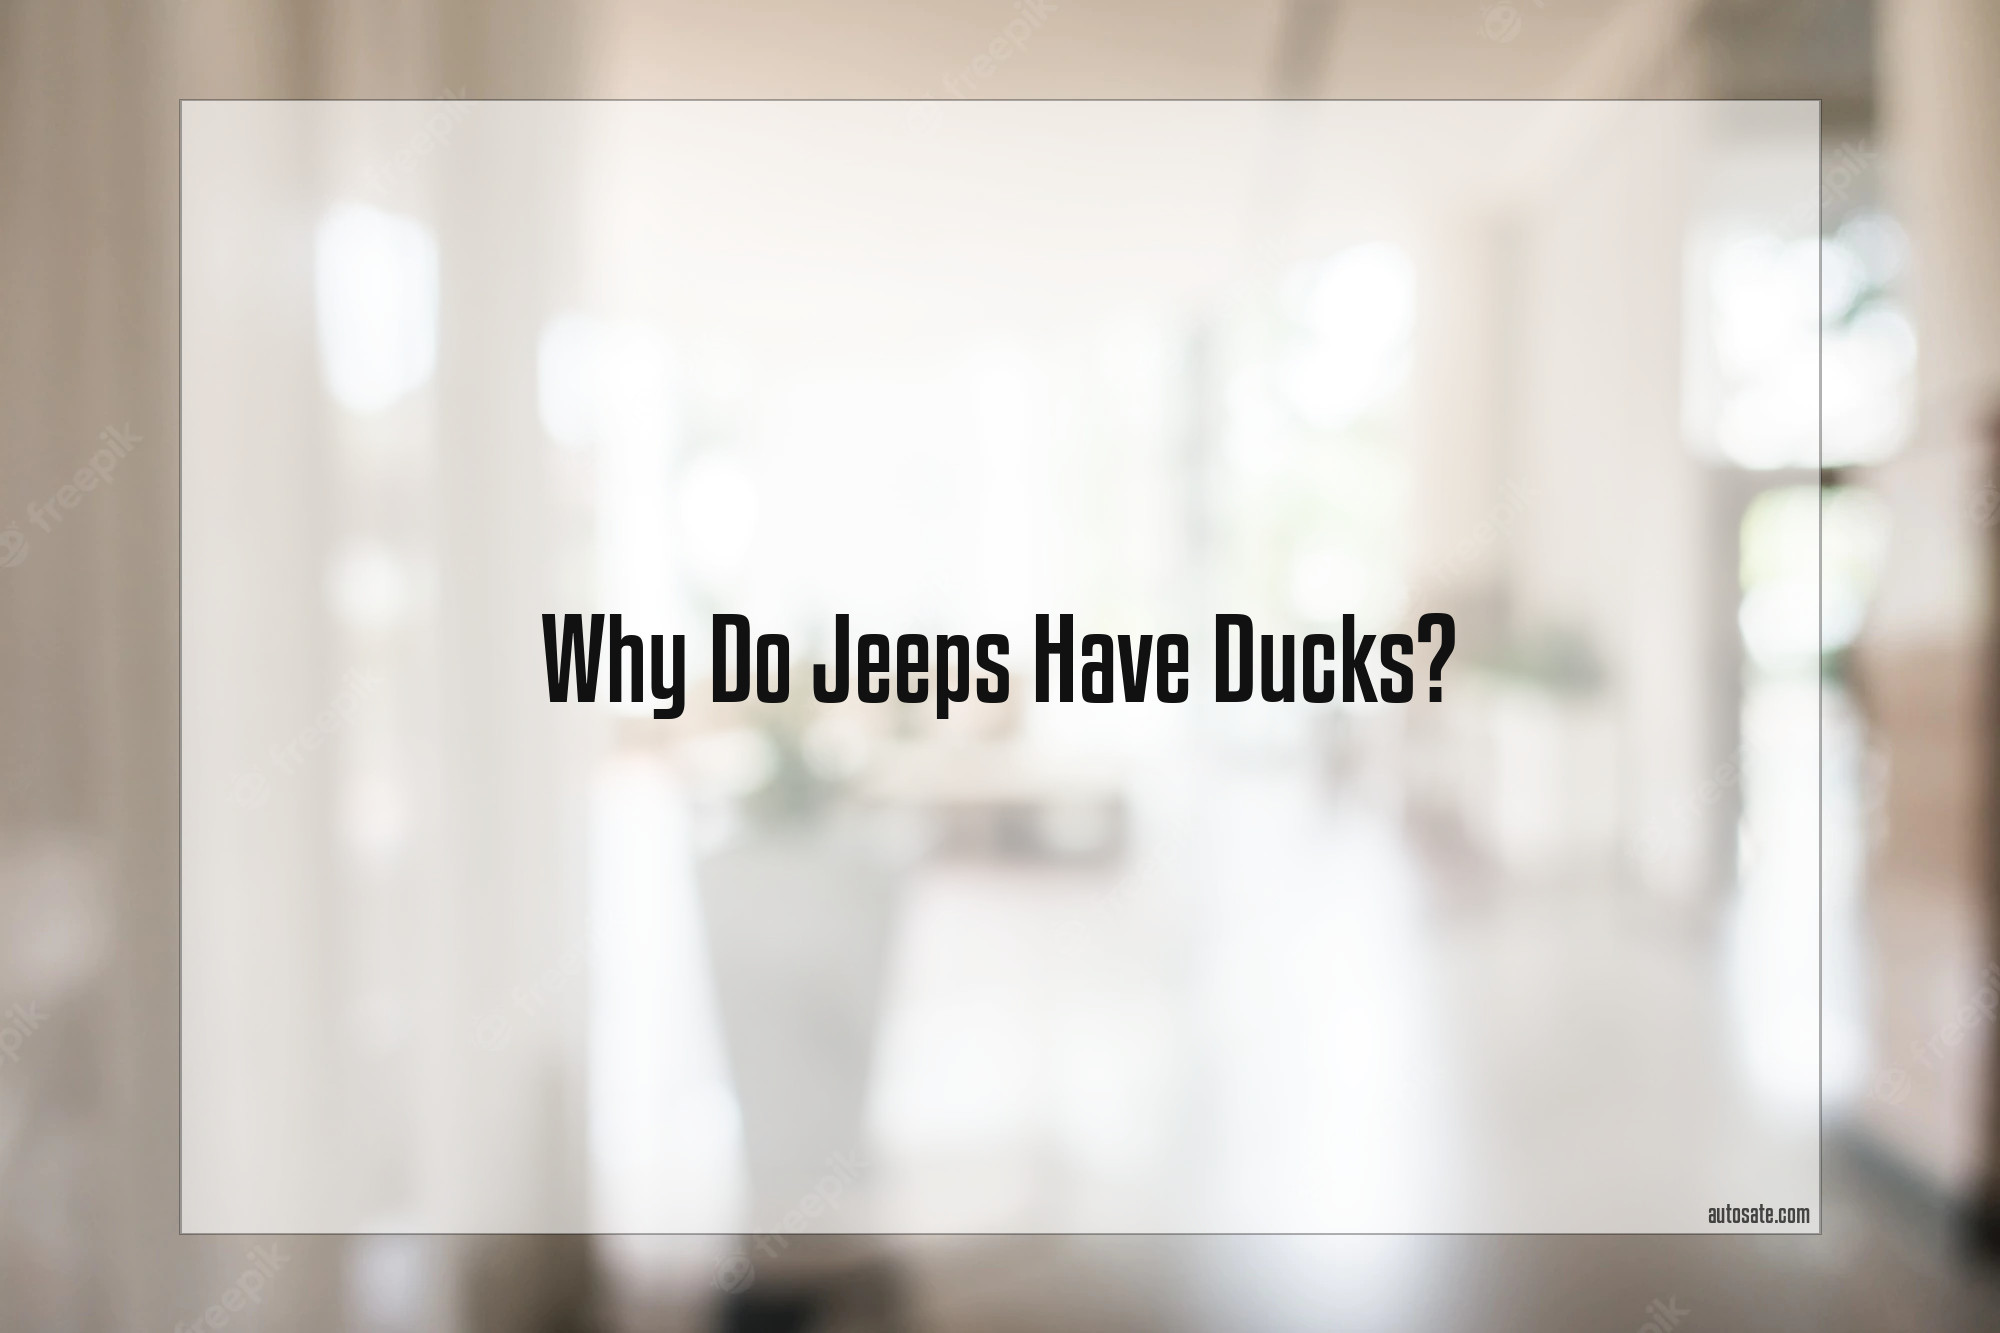 Why Do Jeeps Have Ducks